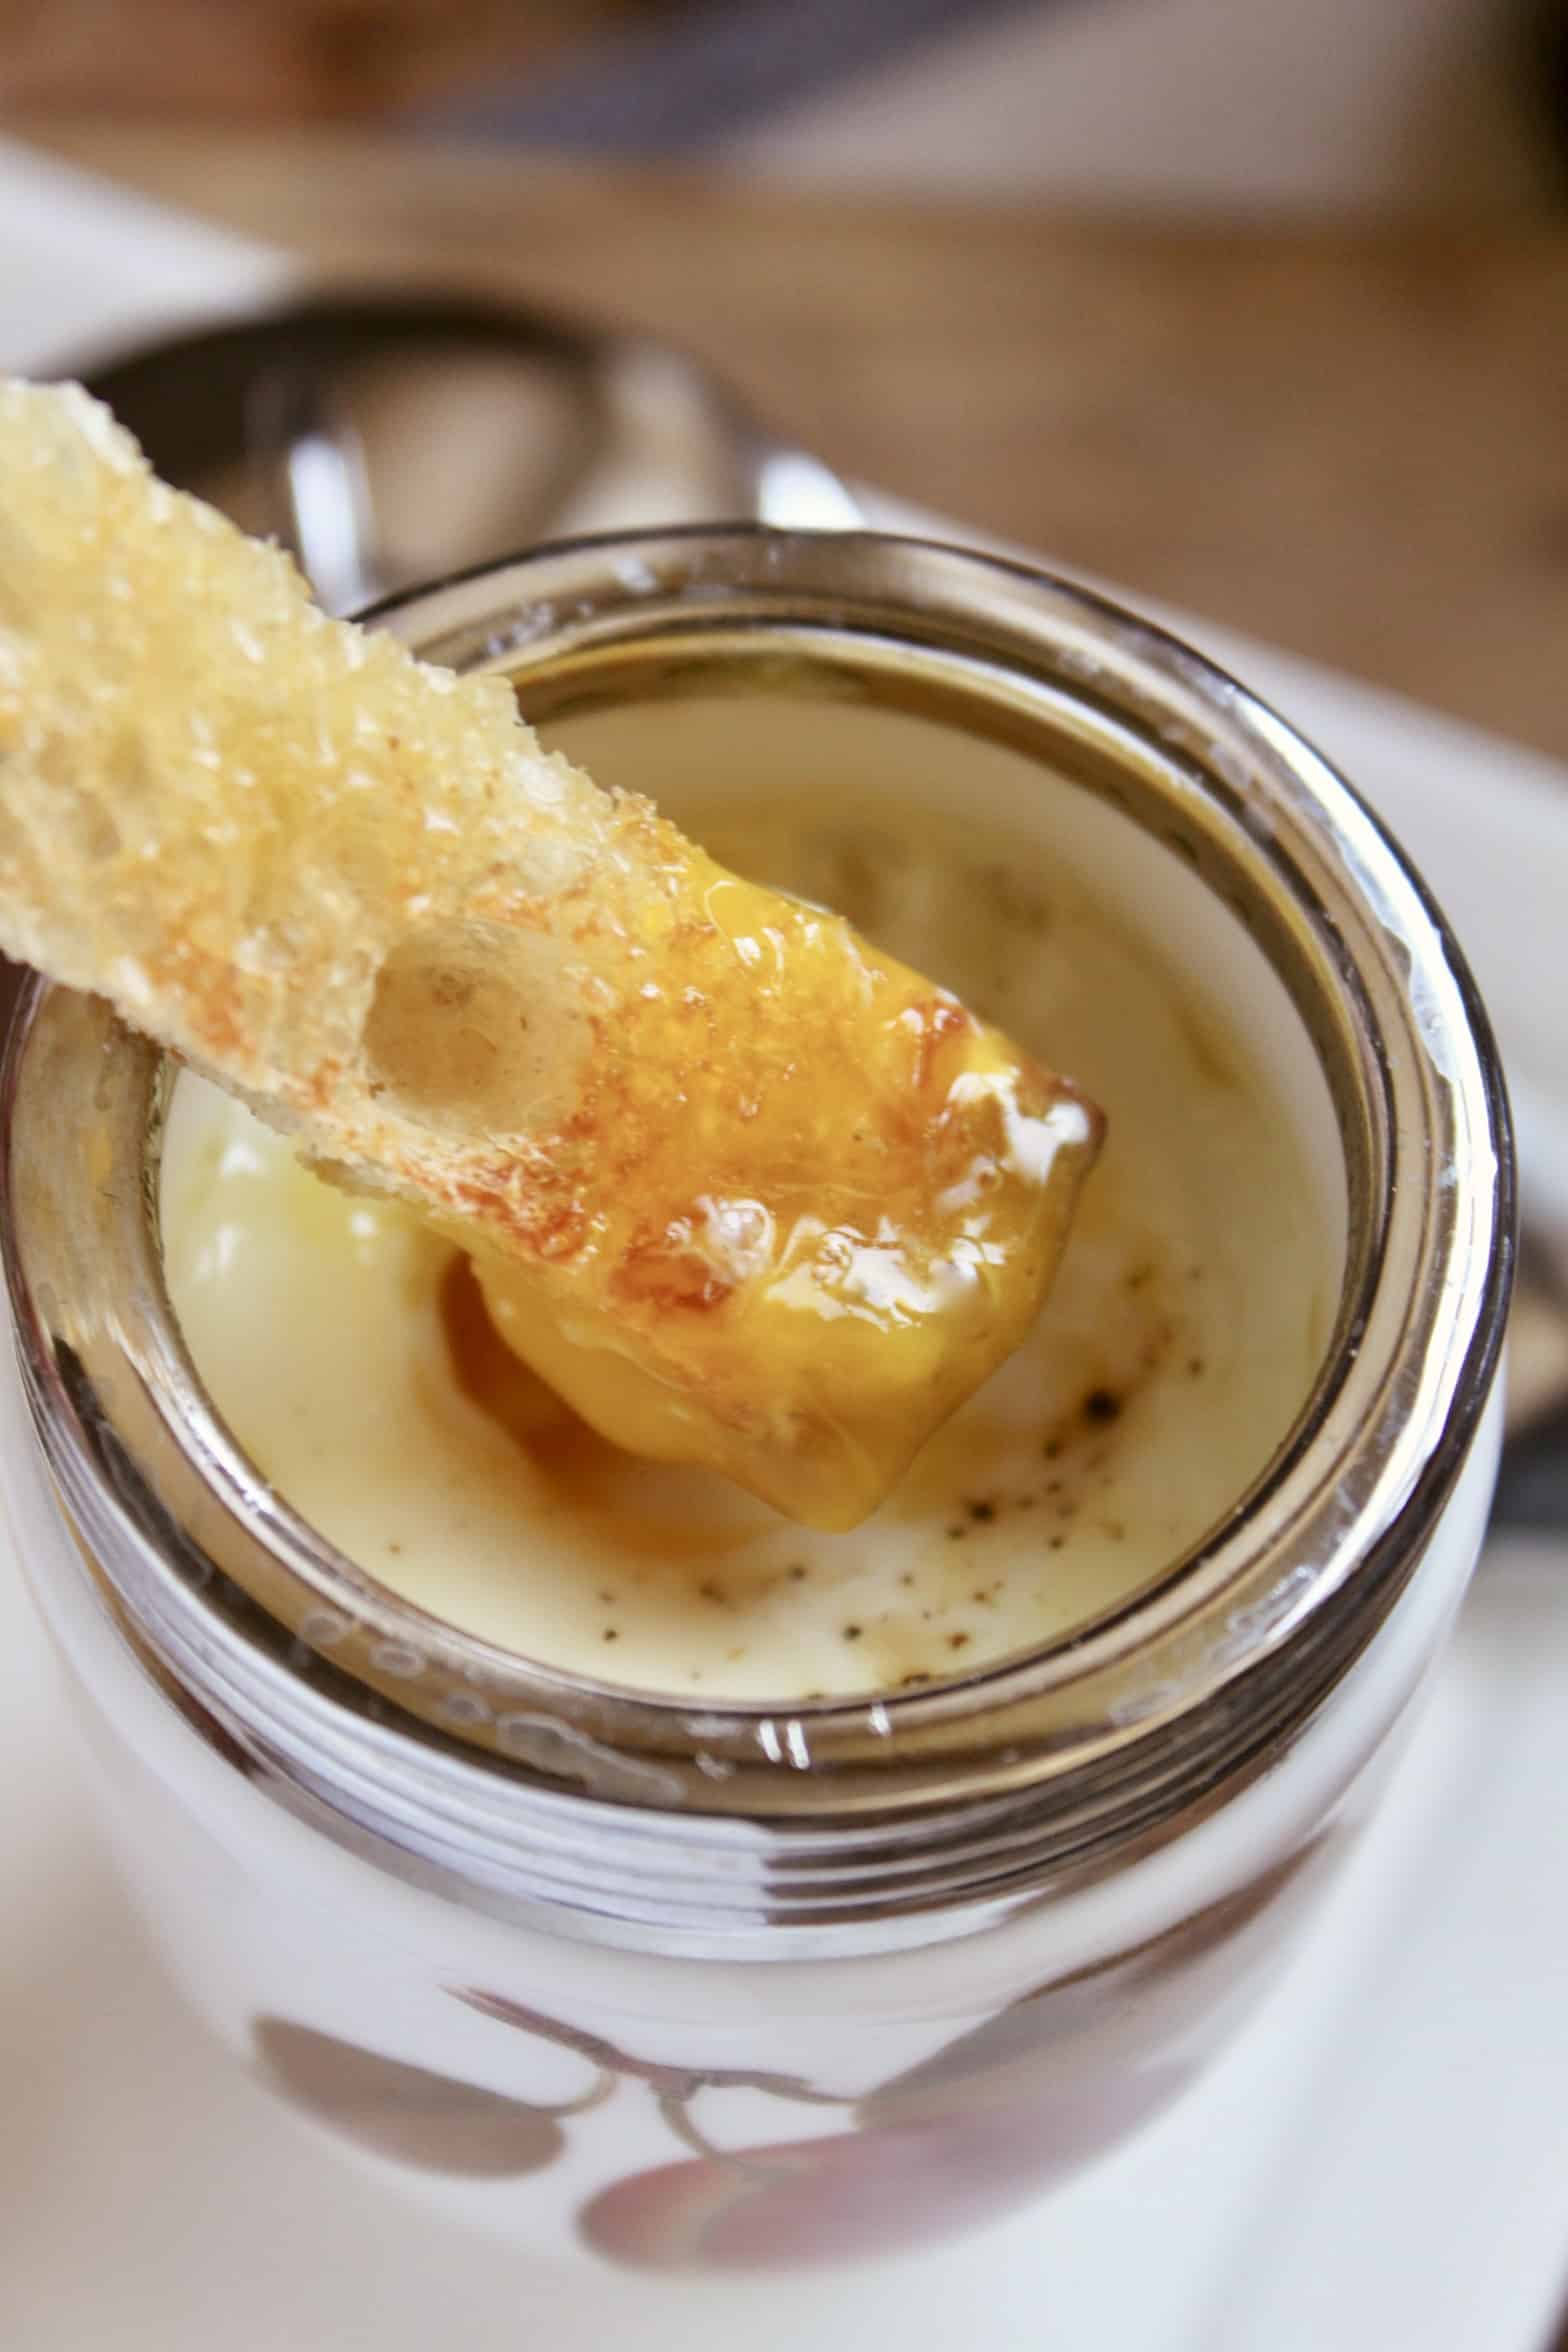 dipping toast into coddled egg